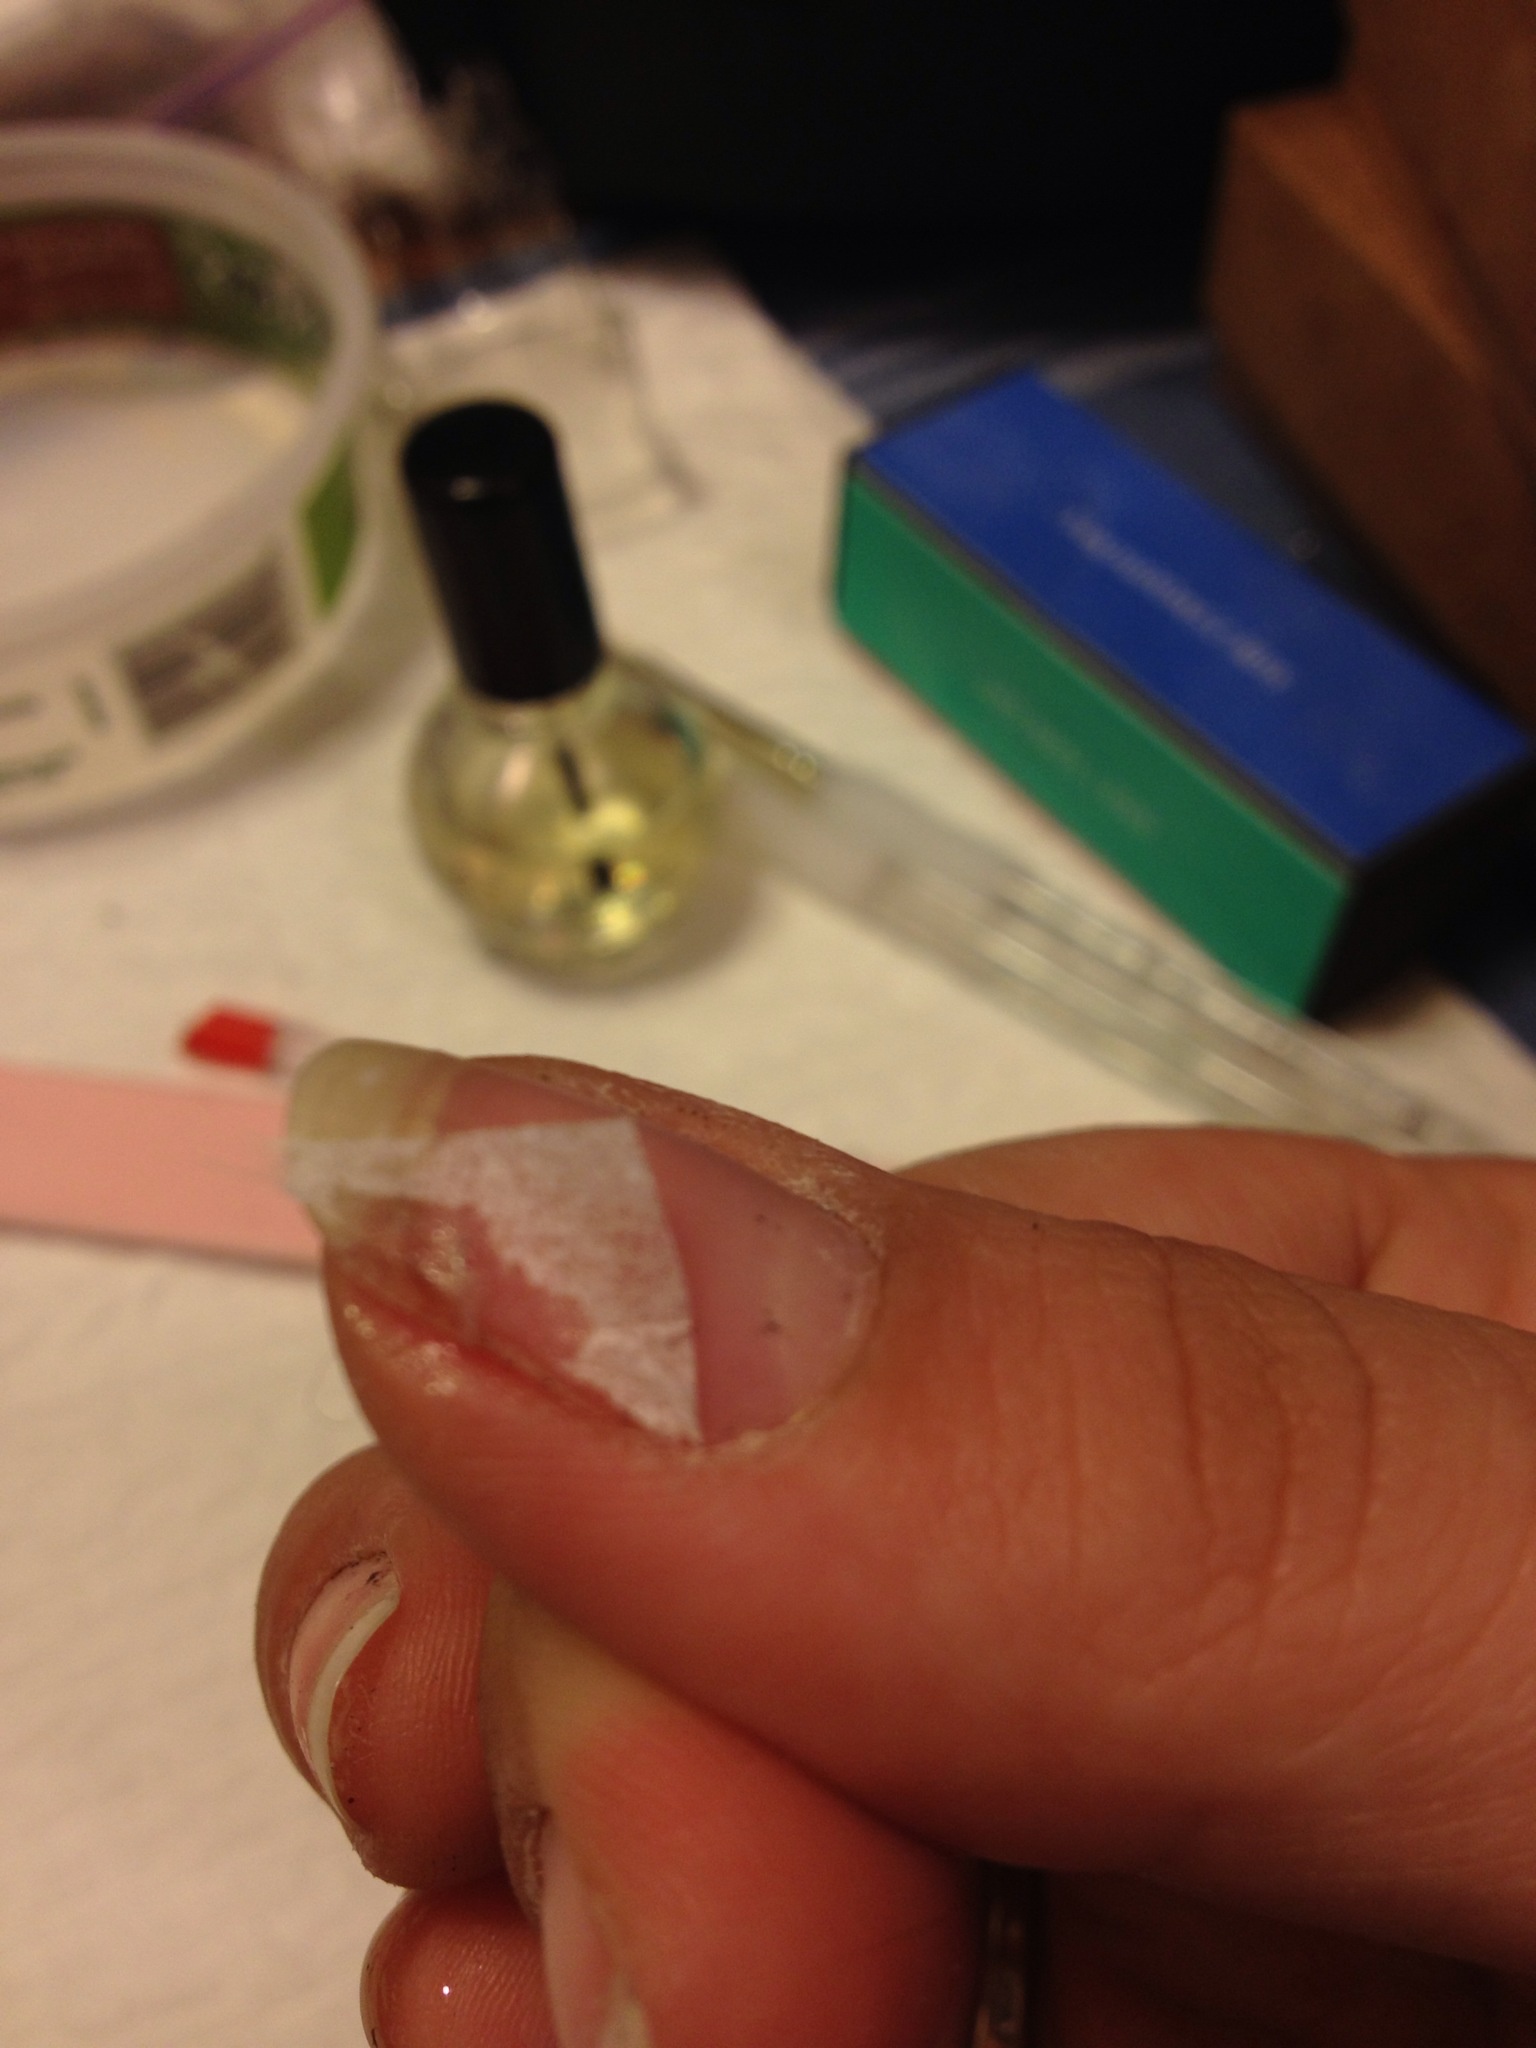 How to fix a cracked nail - B+C Guides